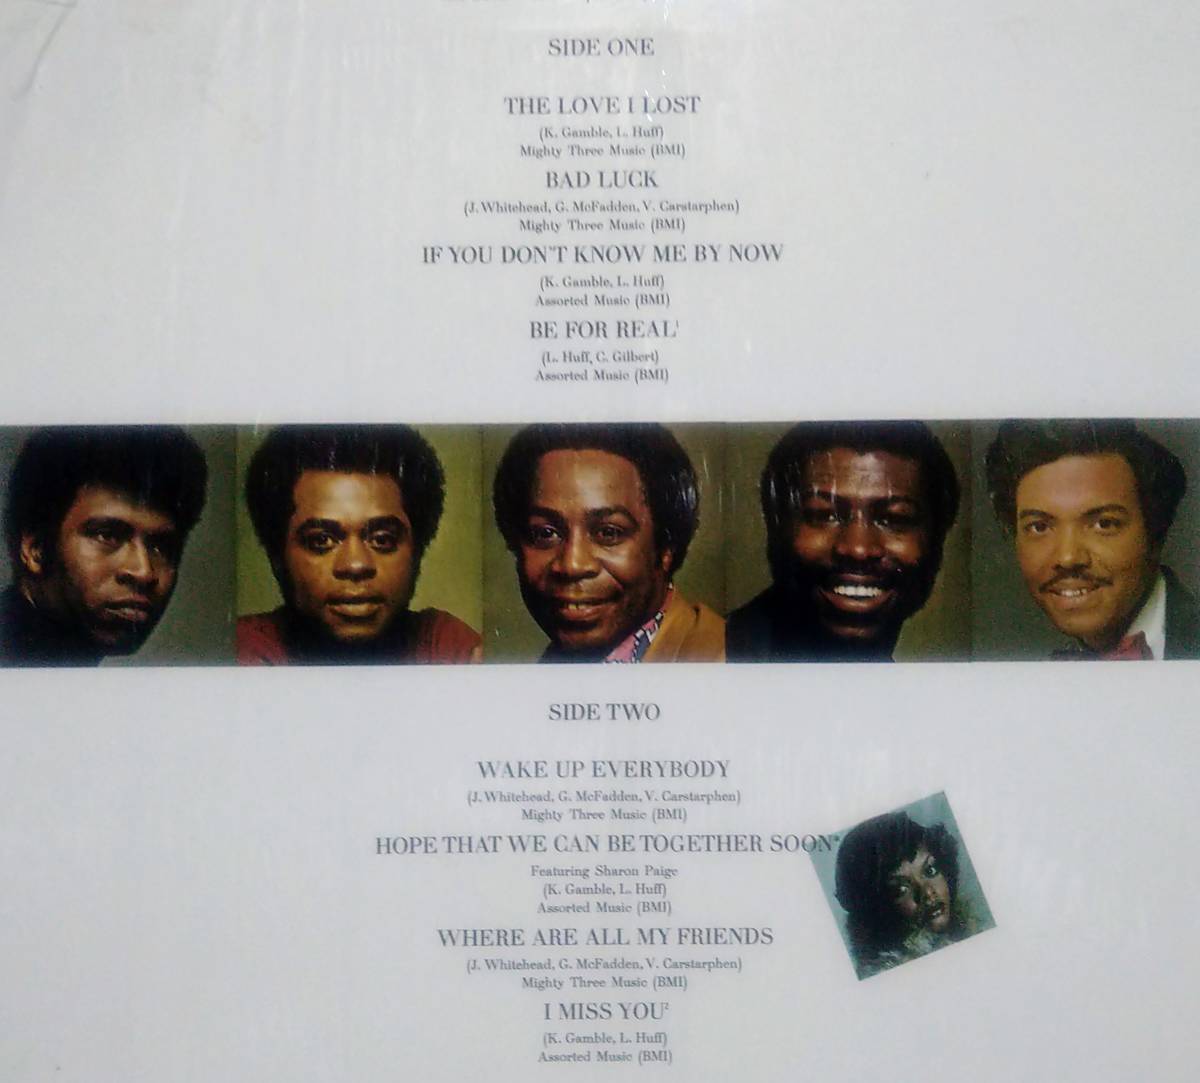 【LP Soul】Harold Melvin & The Blue Notes「All Their Greatest Hits Collectors' Item」US盤 シュリンク付 The Love I Lost.他 収録！_収録内容